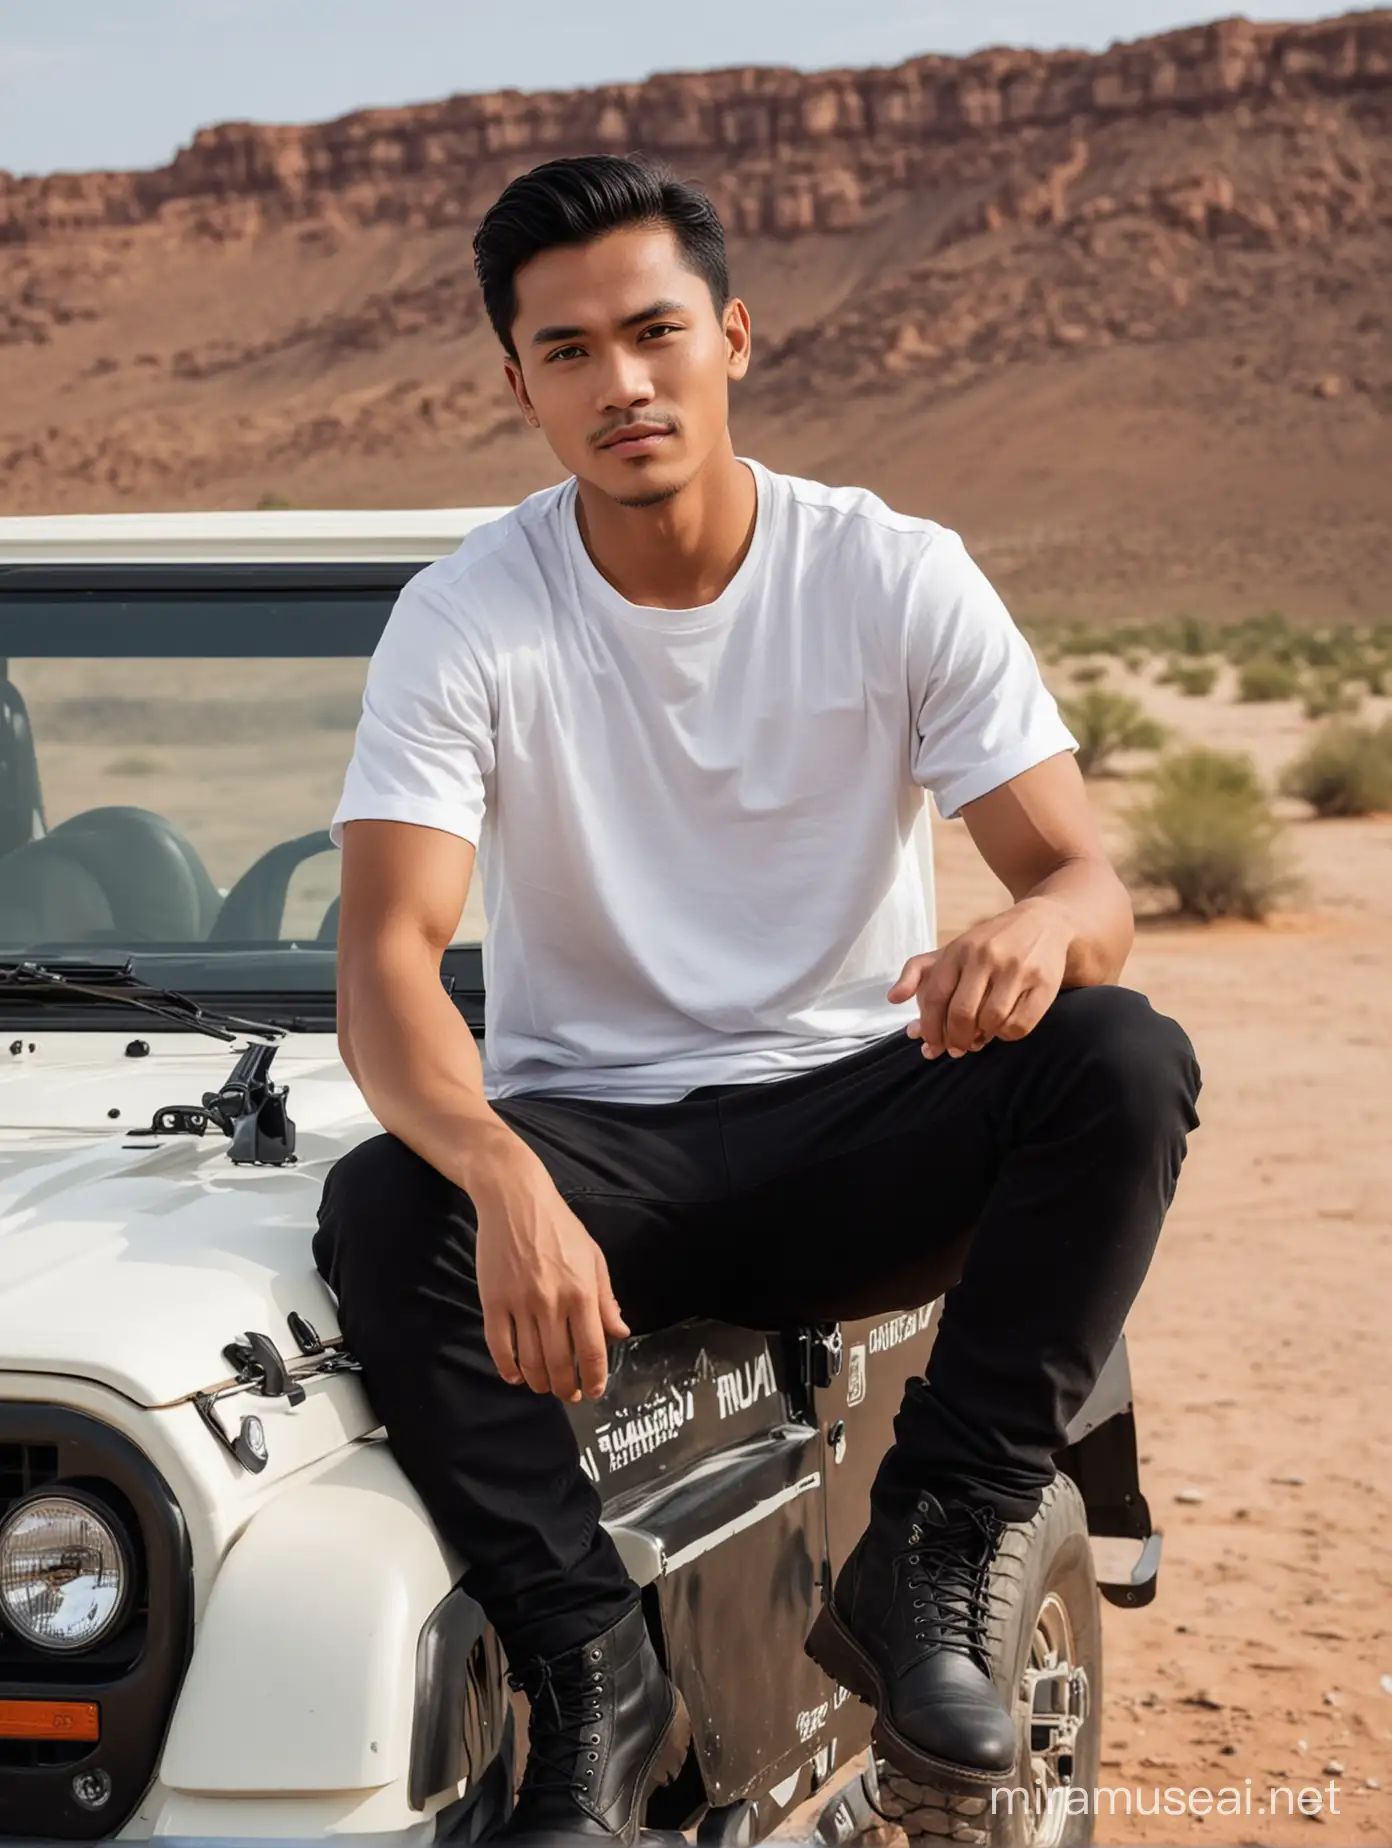 Handsome man from Indonesia, short hair parted neatly to the side, round face, full body, wearing a white t-shirt, black jacket, black boots, sitting on the hood of a jeep, with a desert background